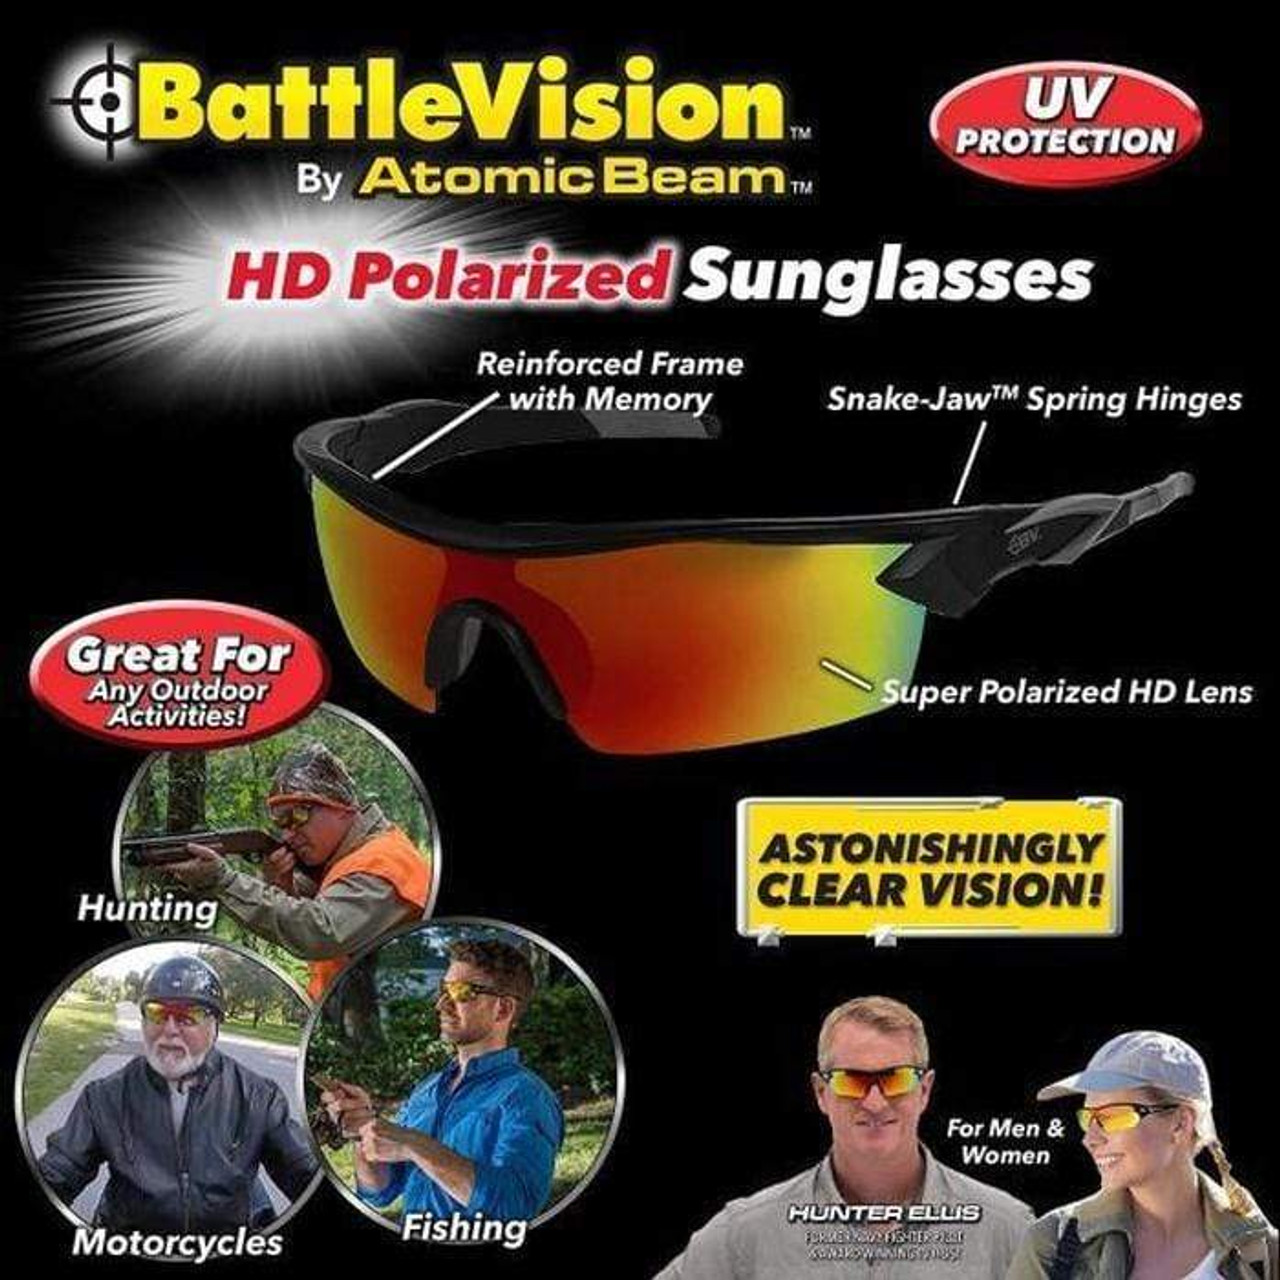 https://cdn11.bigcommerce.com/s-yvpirc28f4/images/stencil/1280x1280/products/46417/92503/atomic-beam-battle-vision-hd-polarized-sunglasses-snatcher-online-shopping-south-africa-17782572089503__40303.1629271965.jpg?c=1&imbypass=on